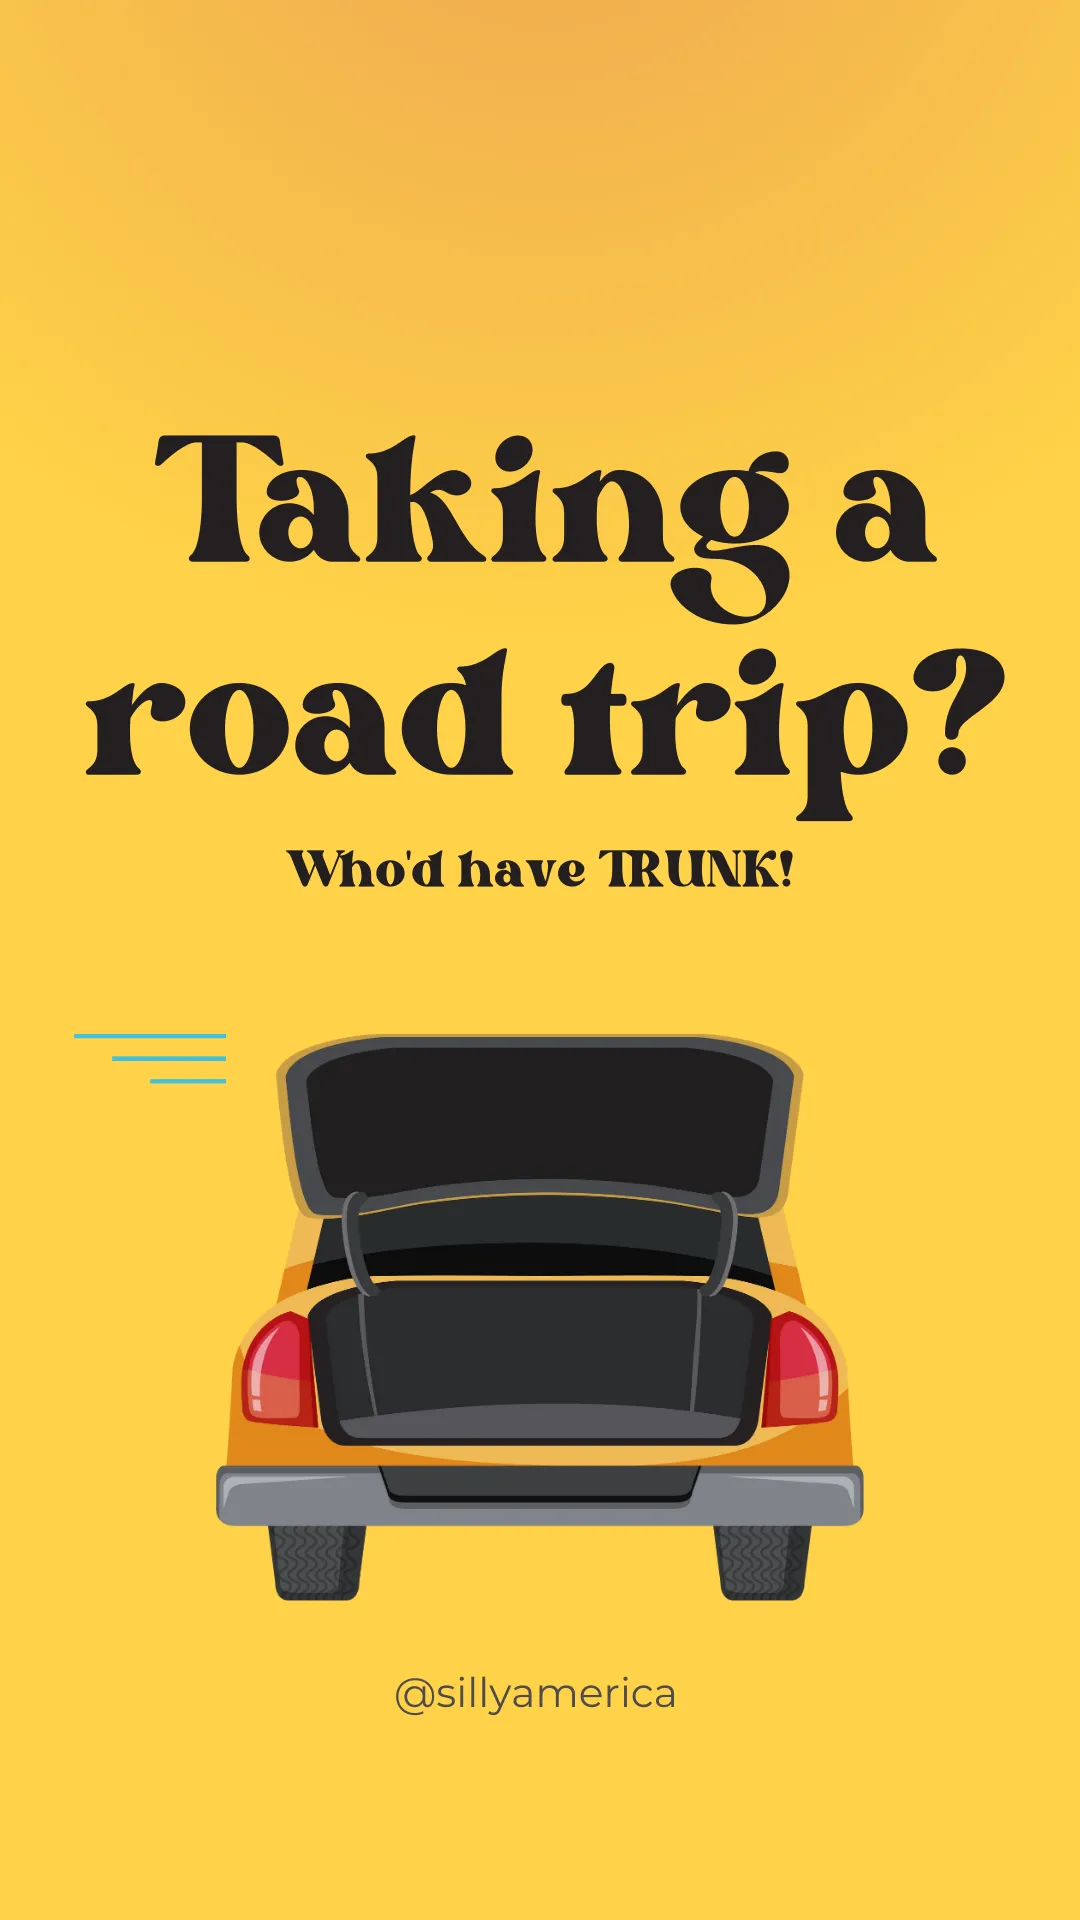 Taking a road trip? Who'd have TRUNK!- Road Trip Puns